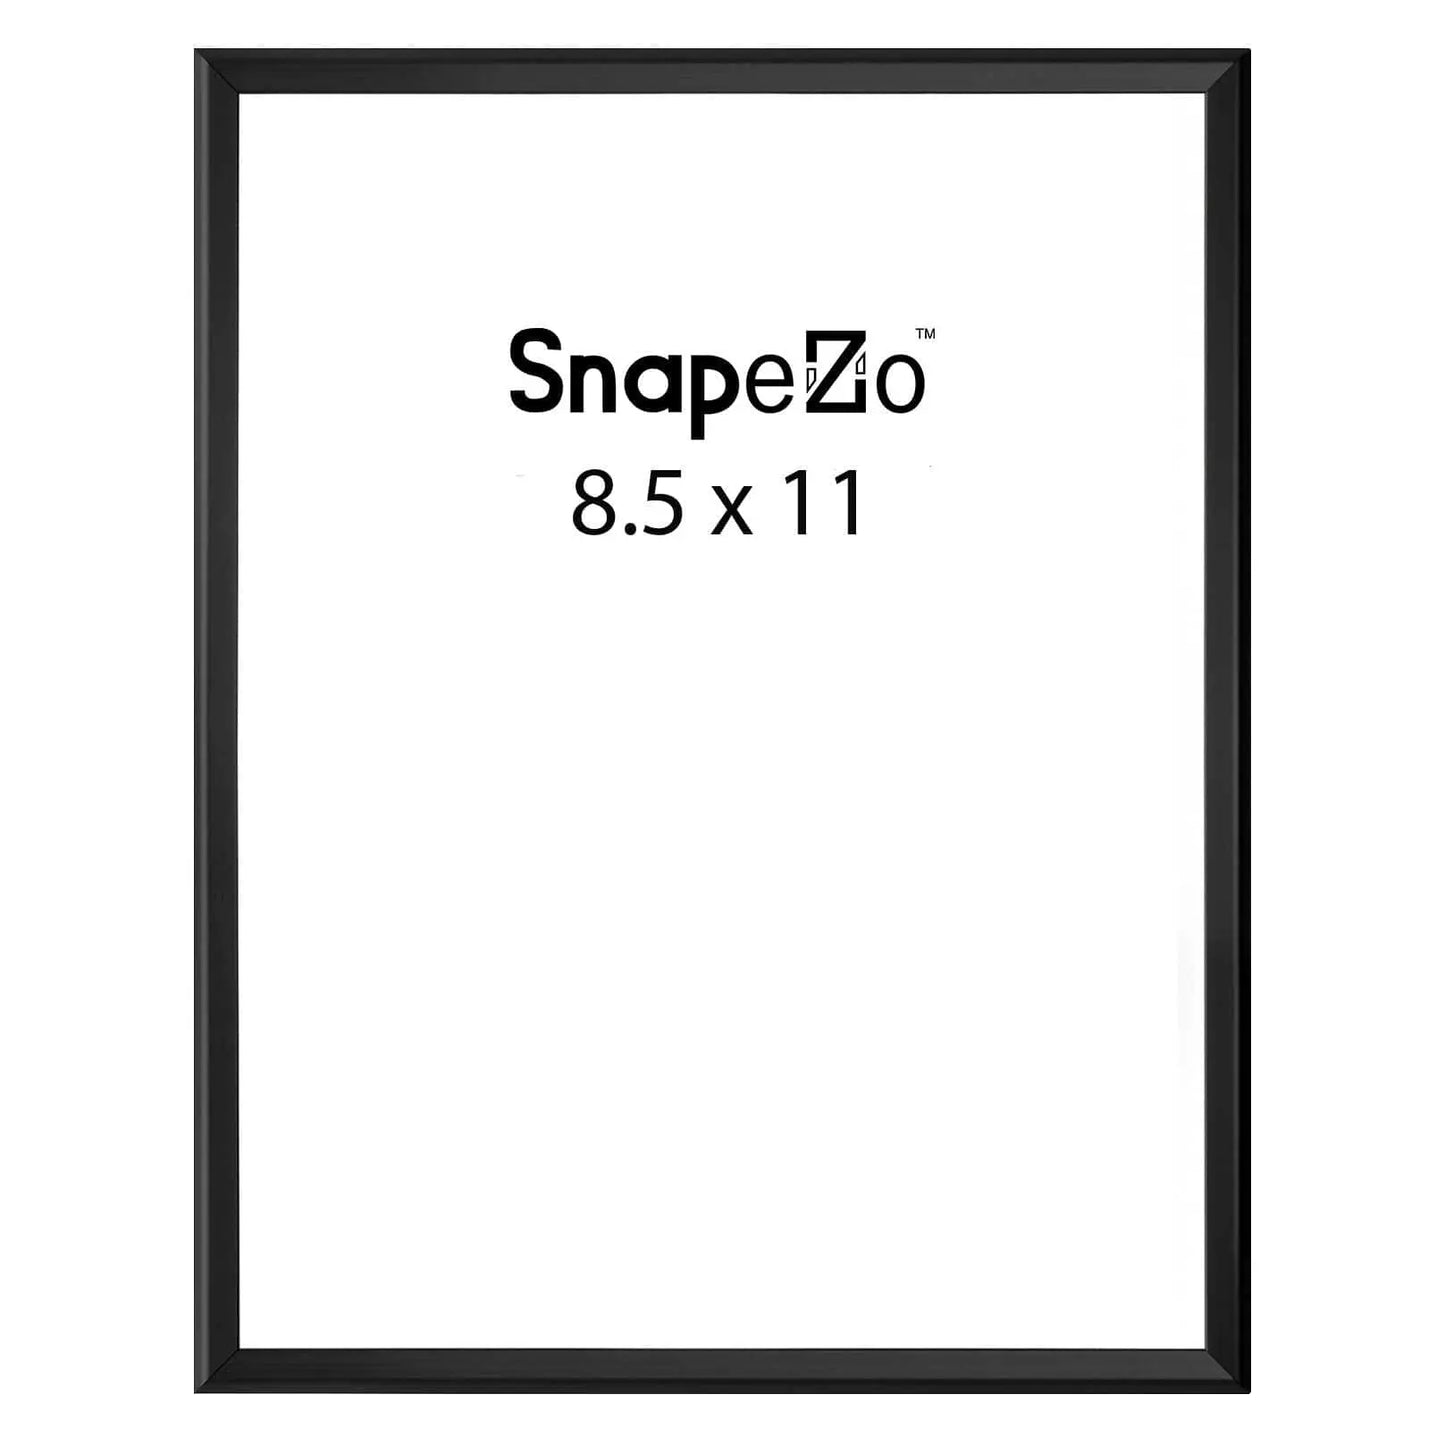 Light Wood certificate snap frame poster size 8.5X11 - 1 inch profile - Snap Frames Direct